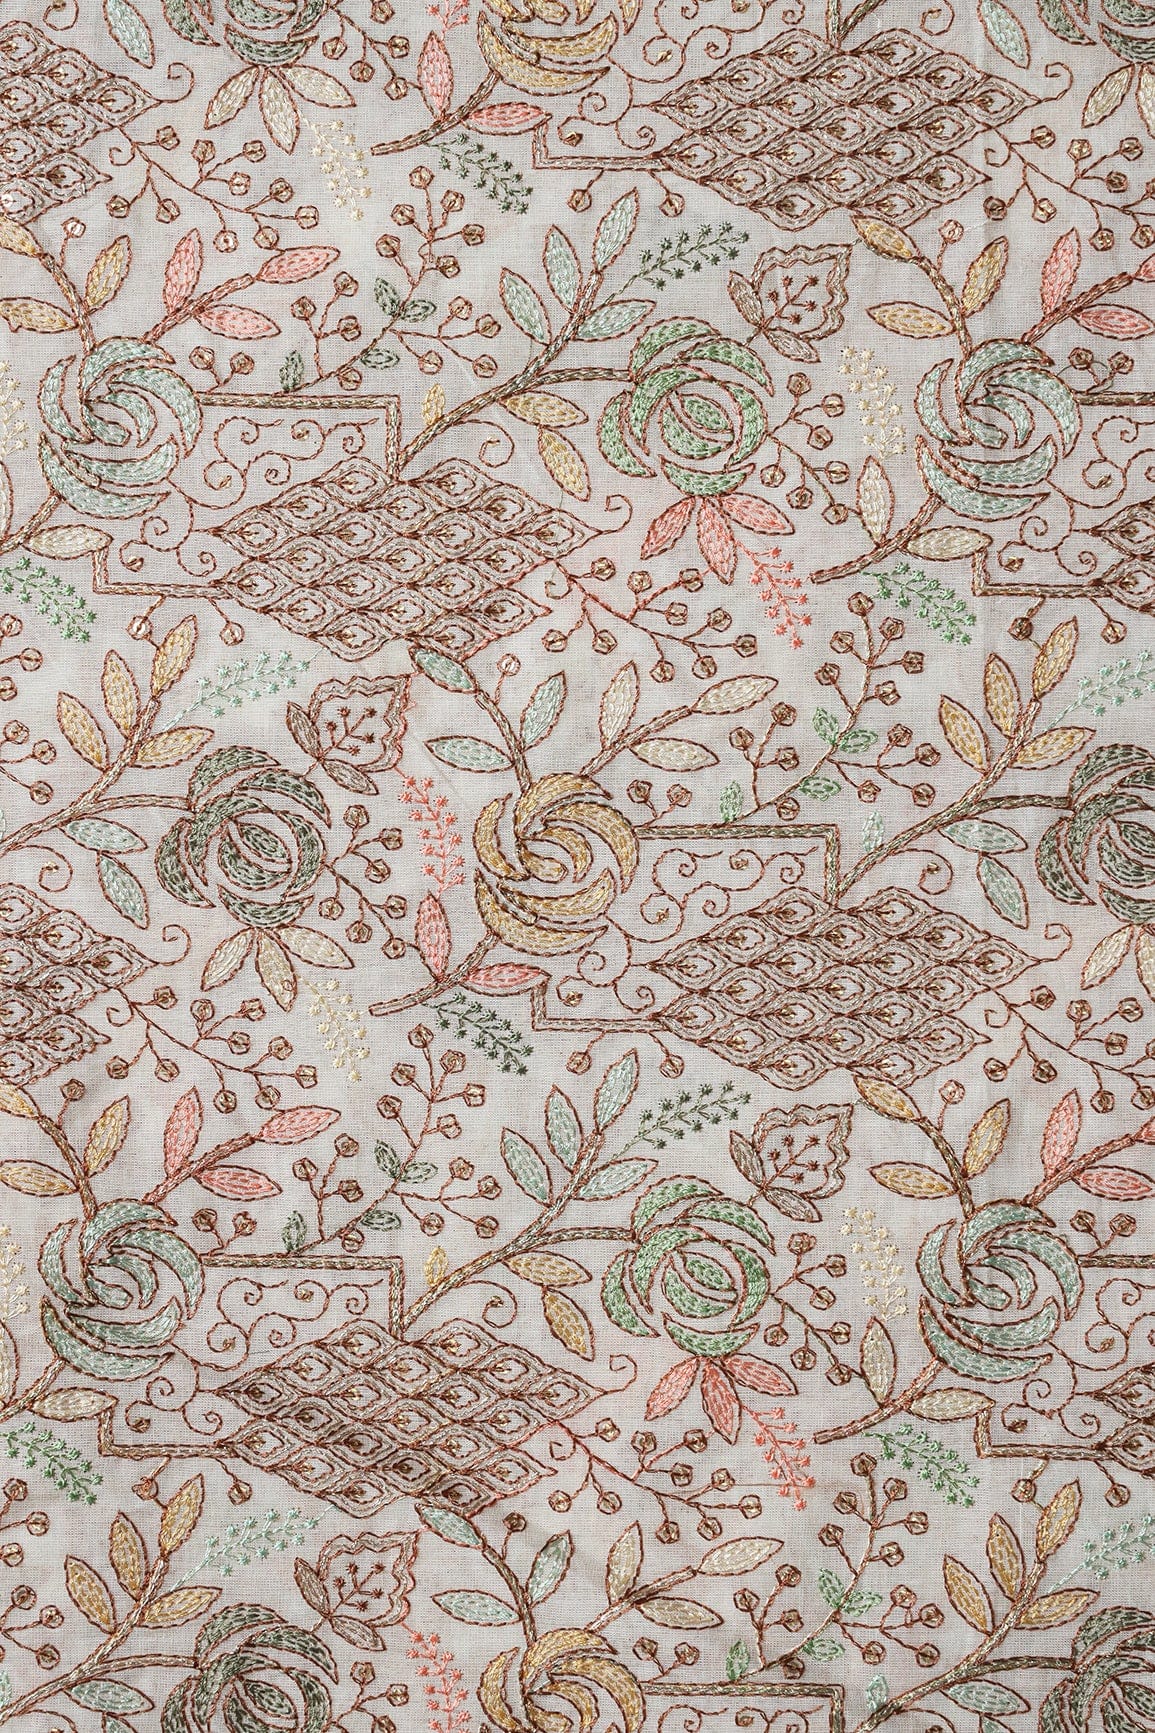 doeraa Embroidery Fabrics Multi Thread With Zari And Gold Sequins Floral Embroidery On Off White Organic Cotton Fabric